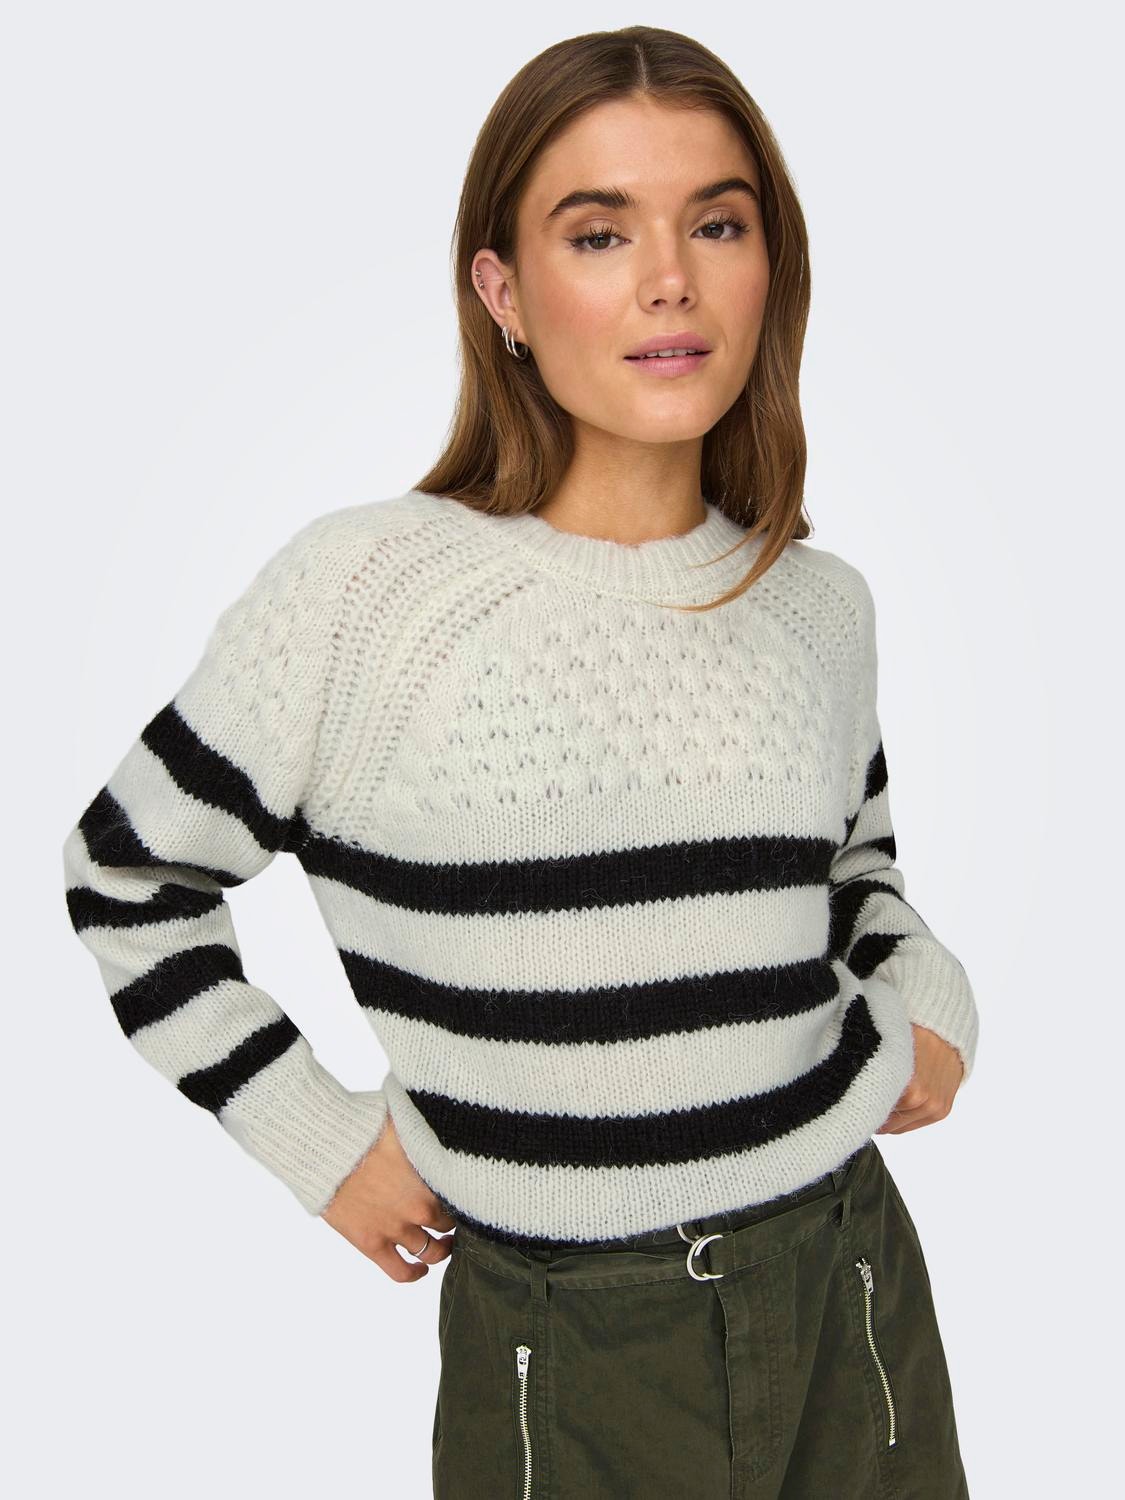 ONLY O-neck knitted pullover -Cloud Dancer - 15323980